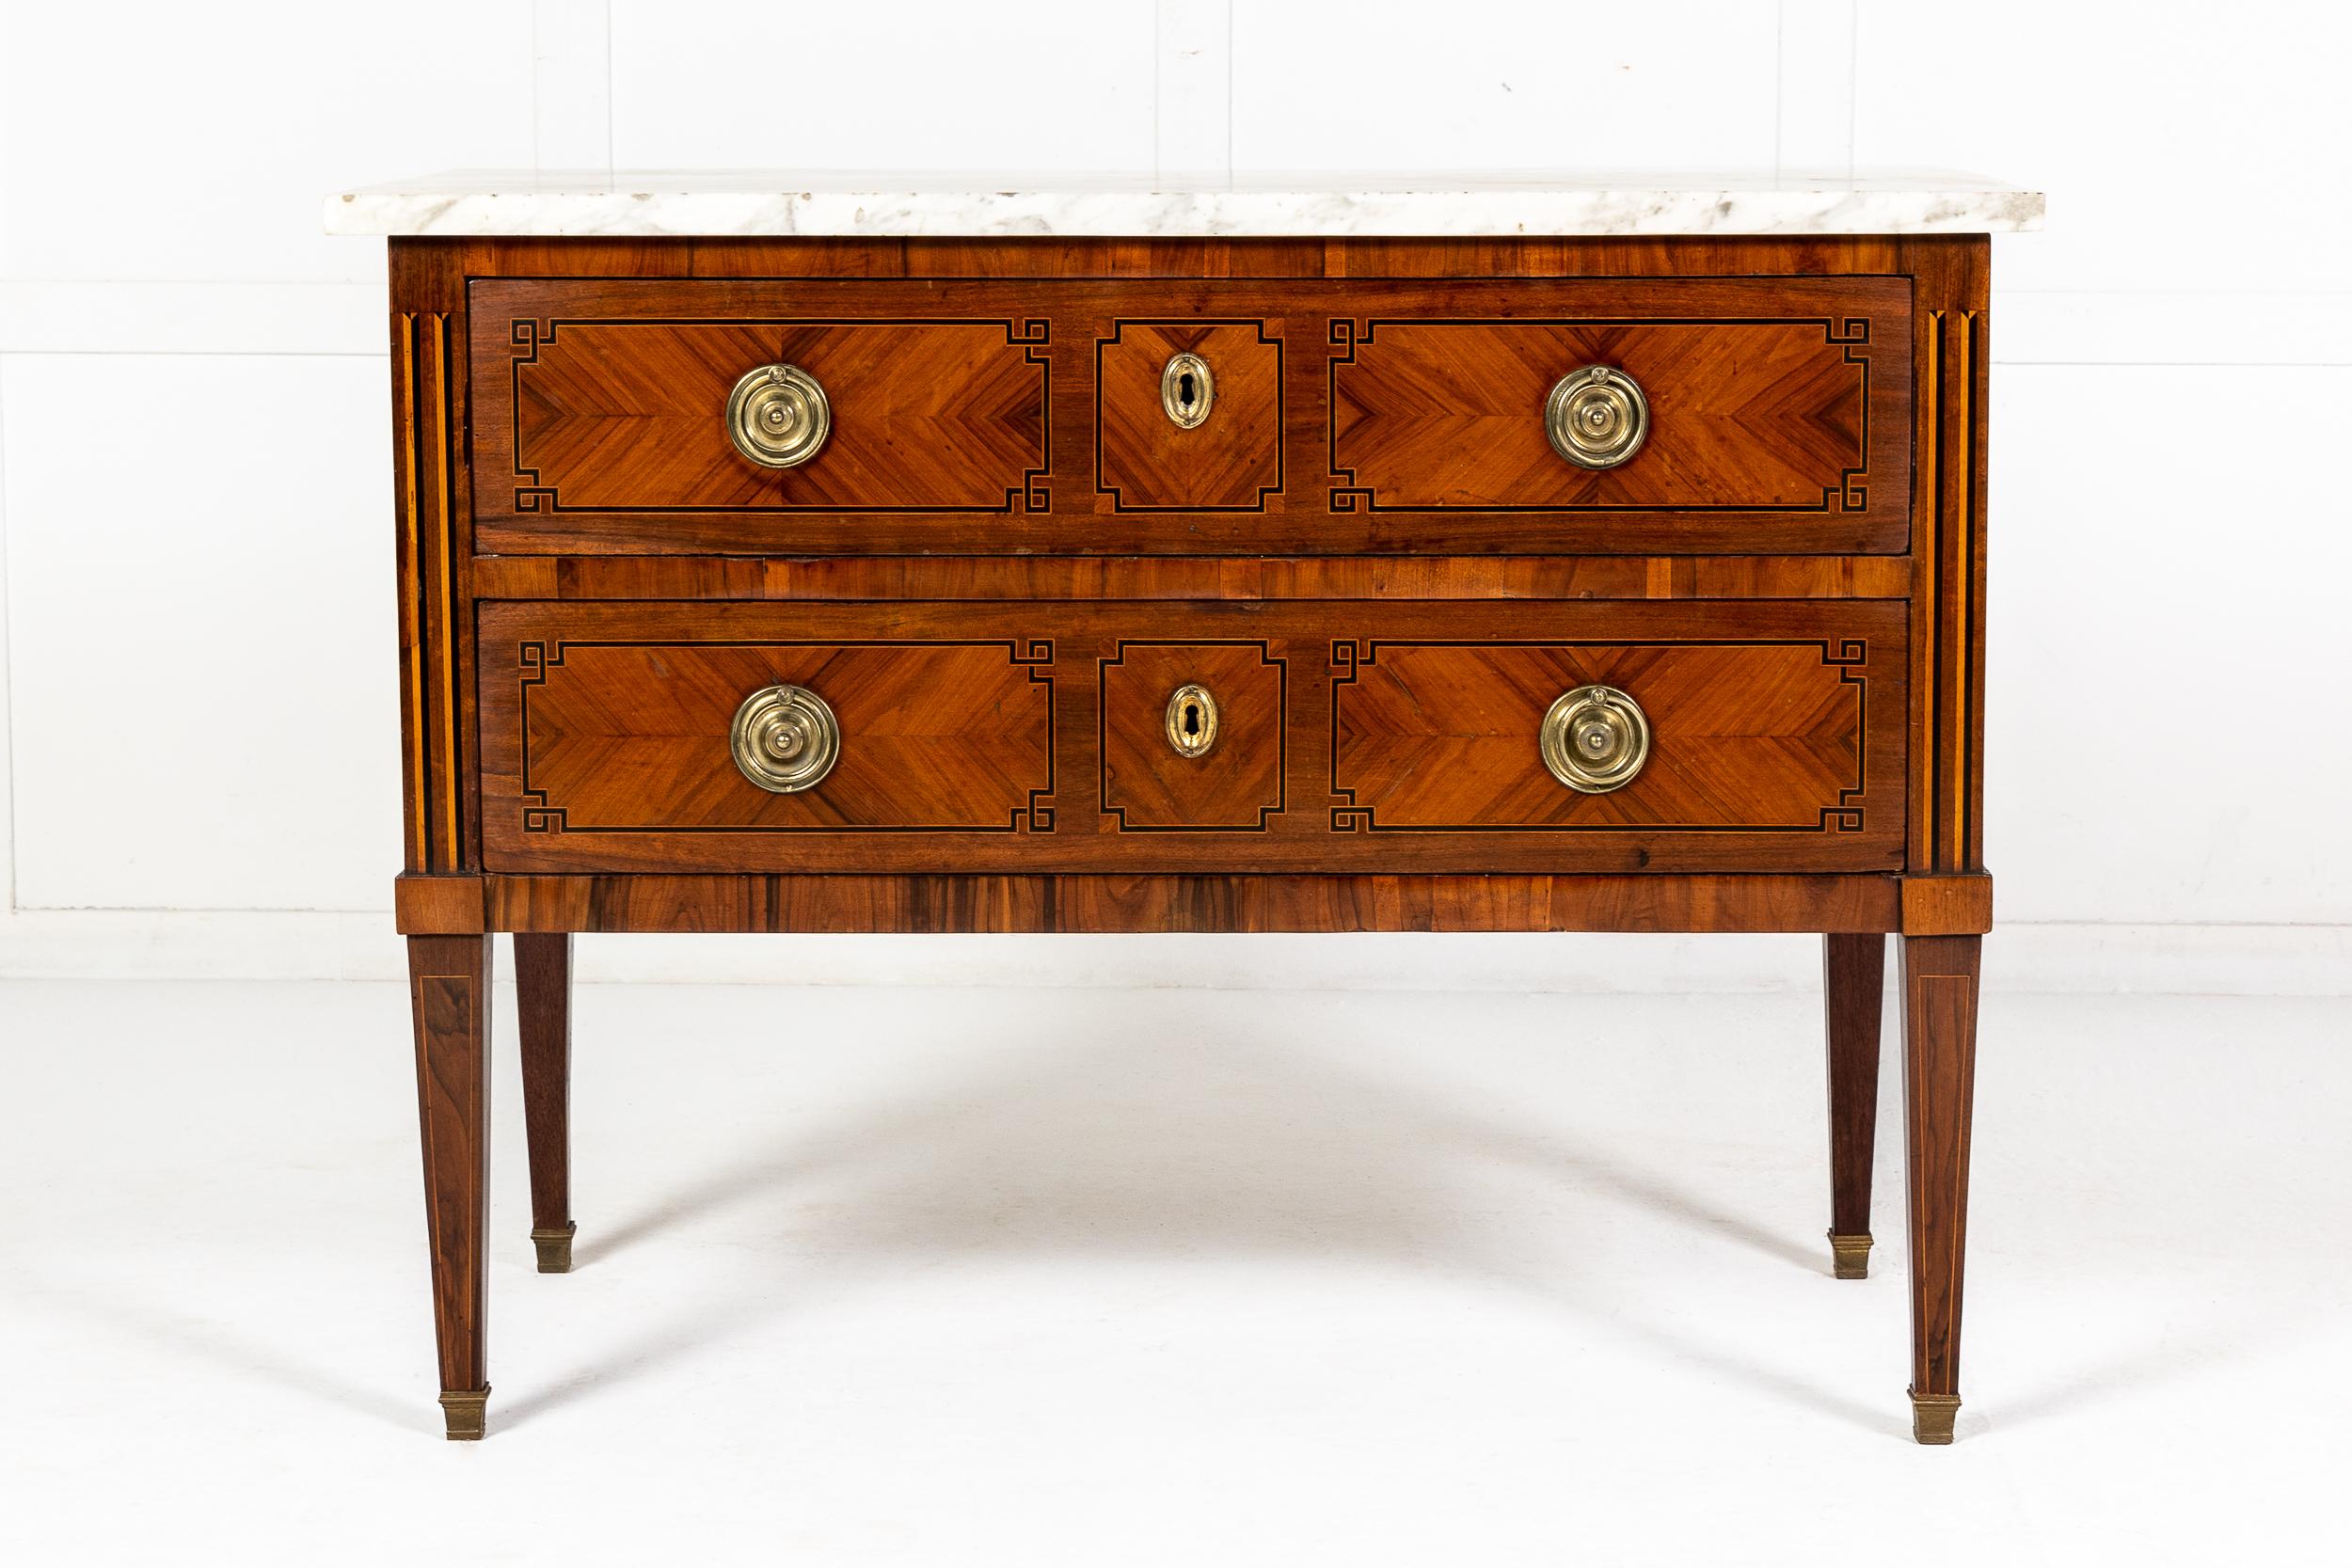 A handsome 18th century kingwood and walnut commode with a white and grey veined marble top, having two long drawers below with brass ring pull handles and escutcheons, decorated with inlay of ebony and satinwood, with matching inlay to the sides